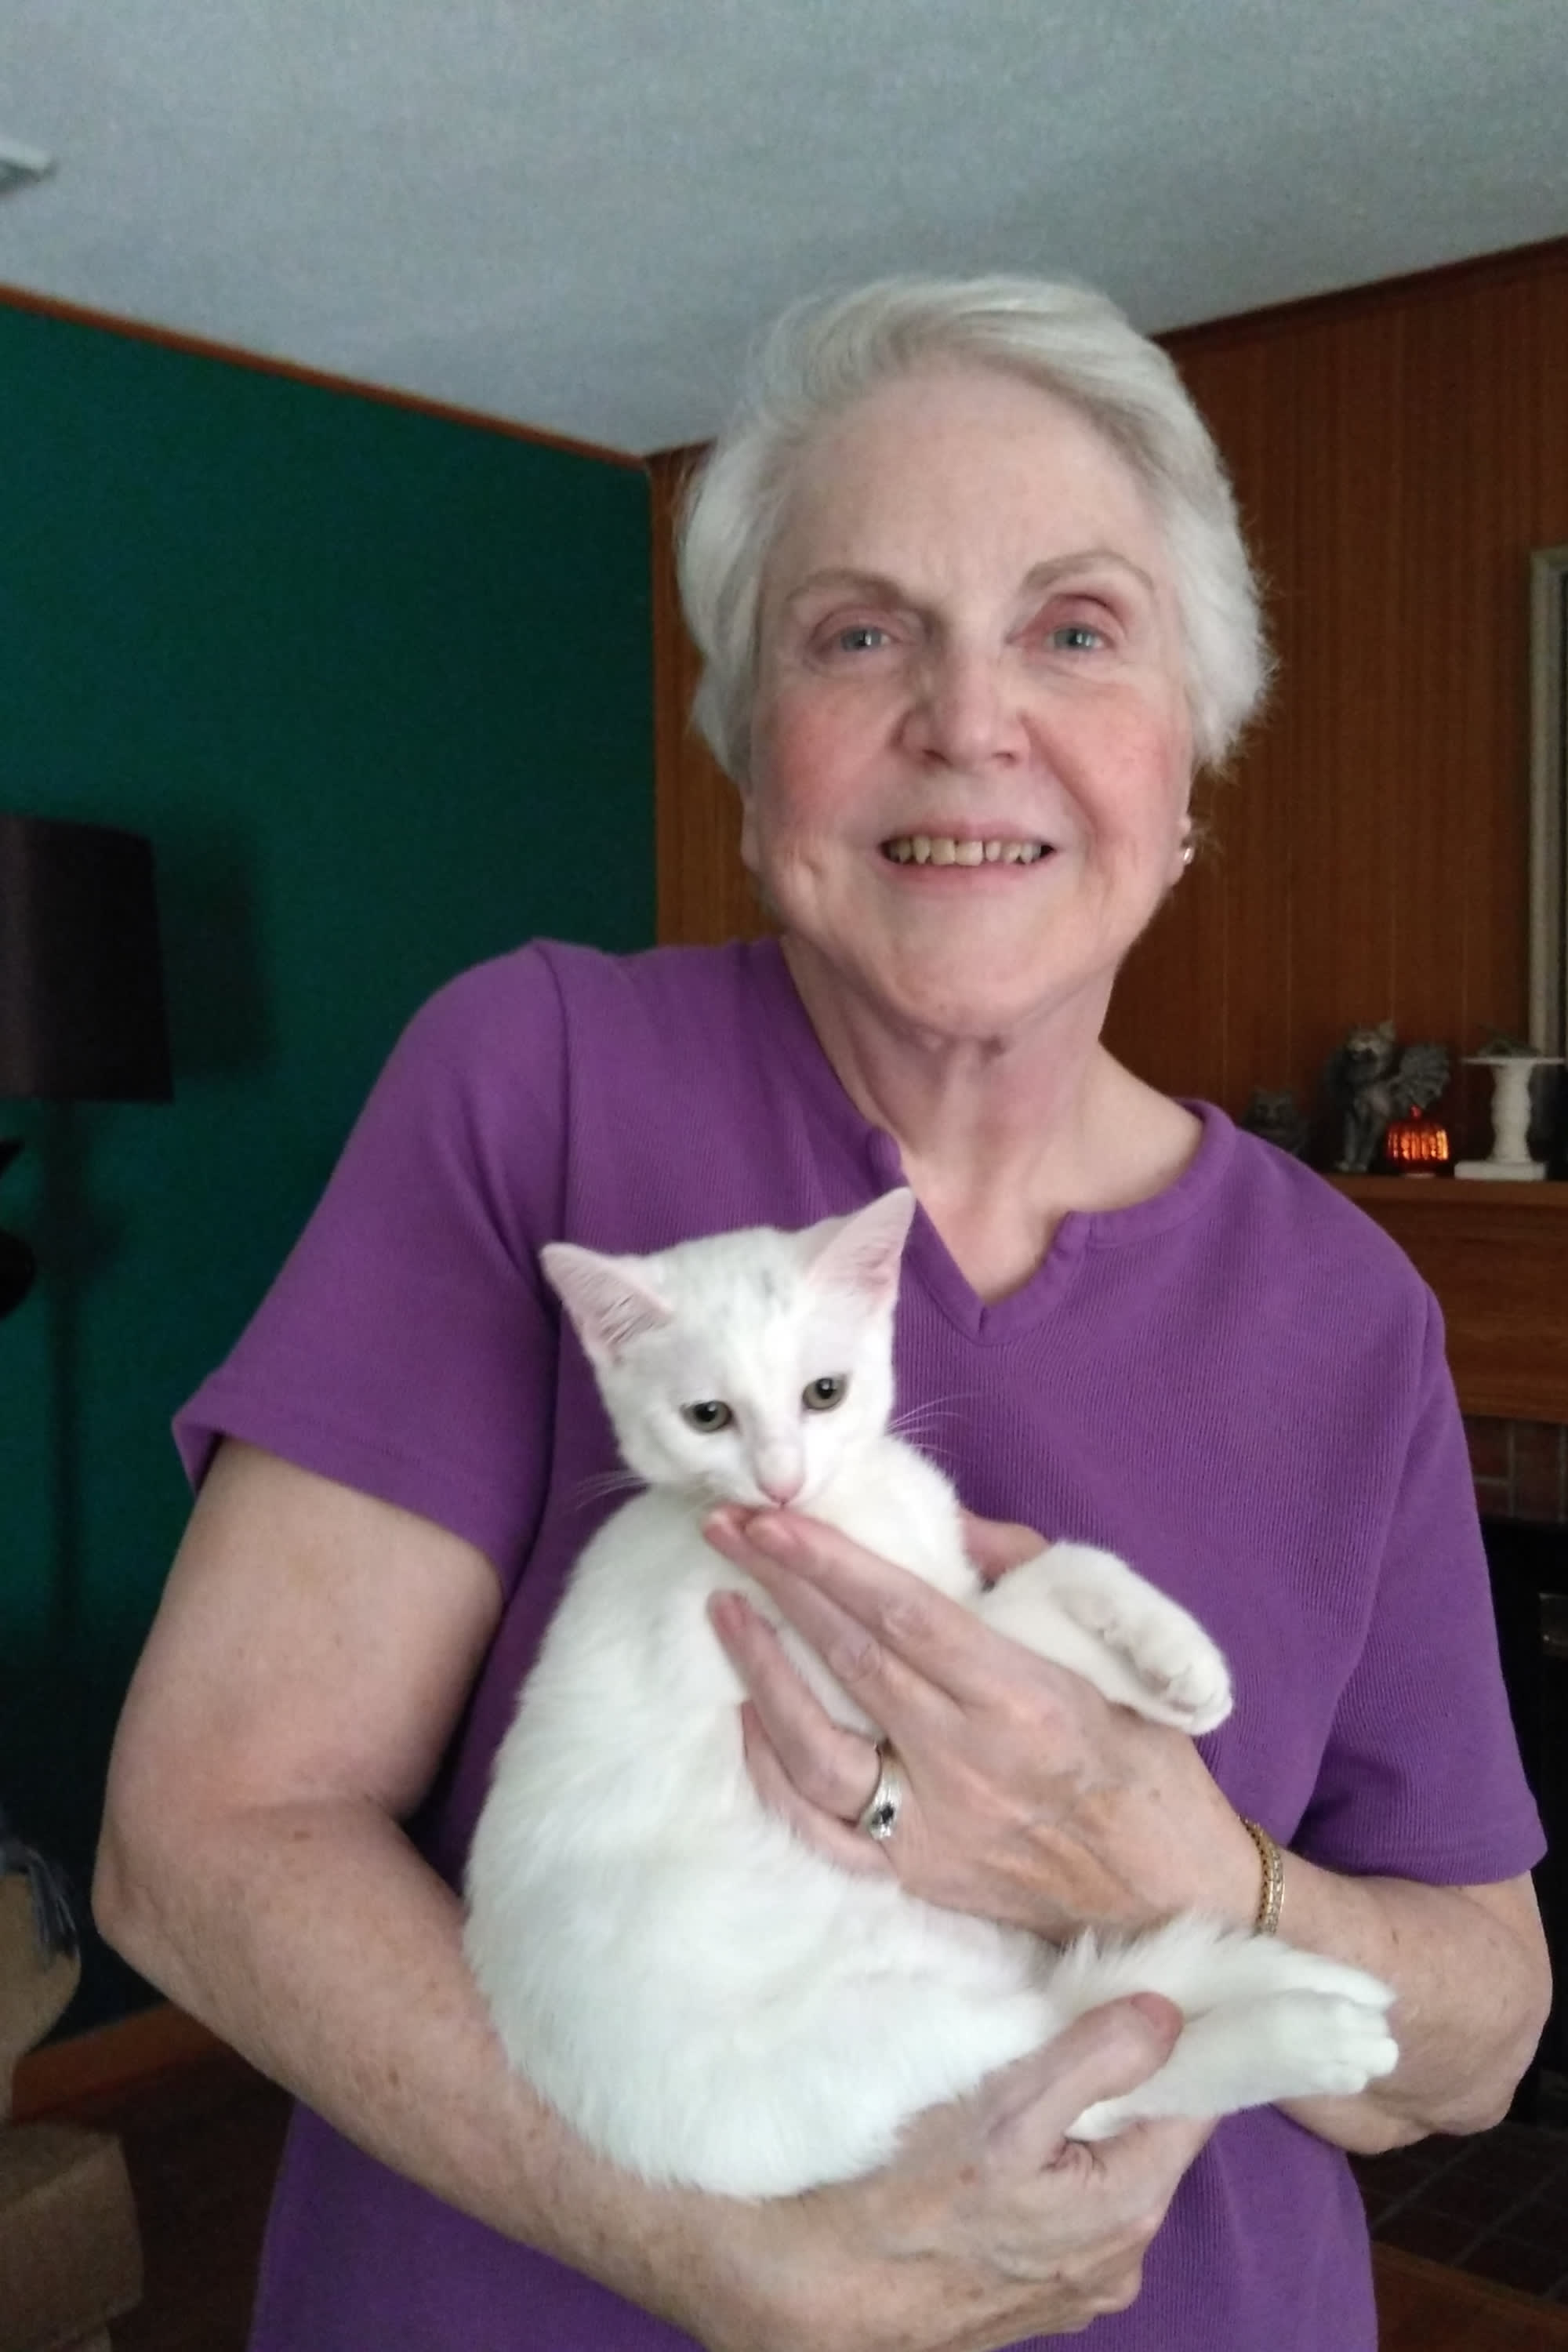 Trish Zappone with her cat Mewster